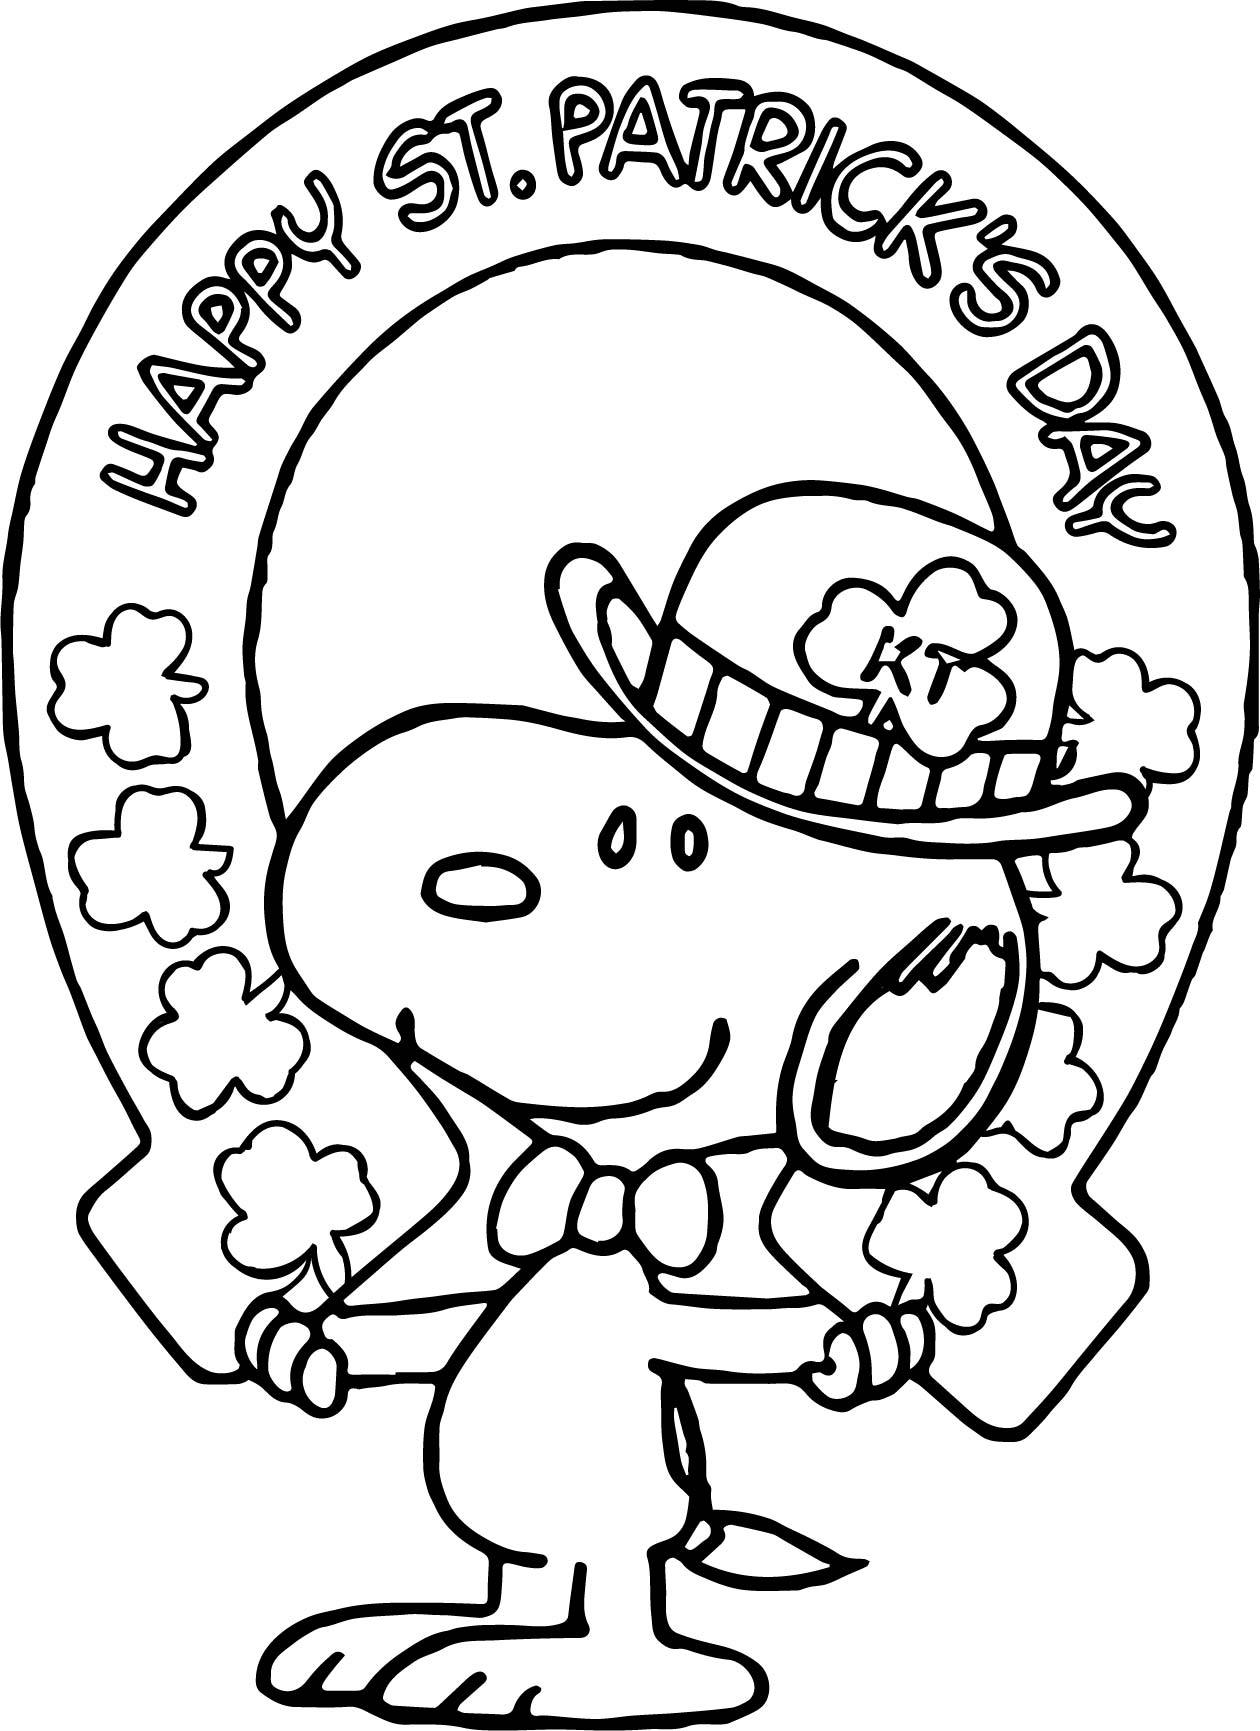 Saint Patrick Coloring Page At GetColorings Free Printable Colorings Pages To Print And Color